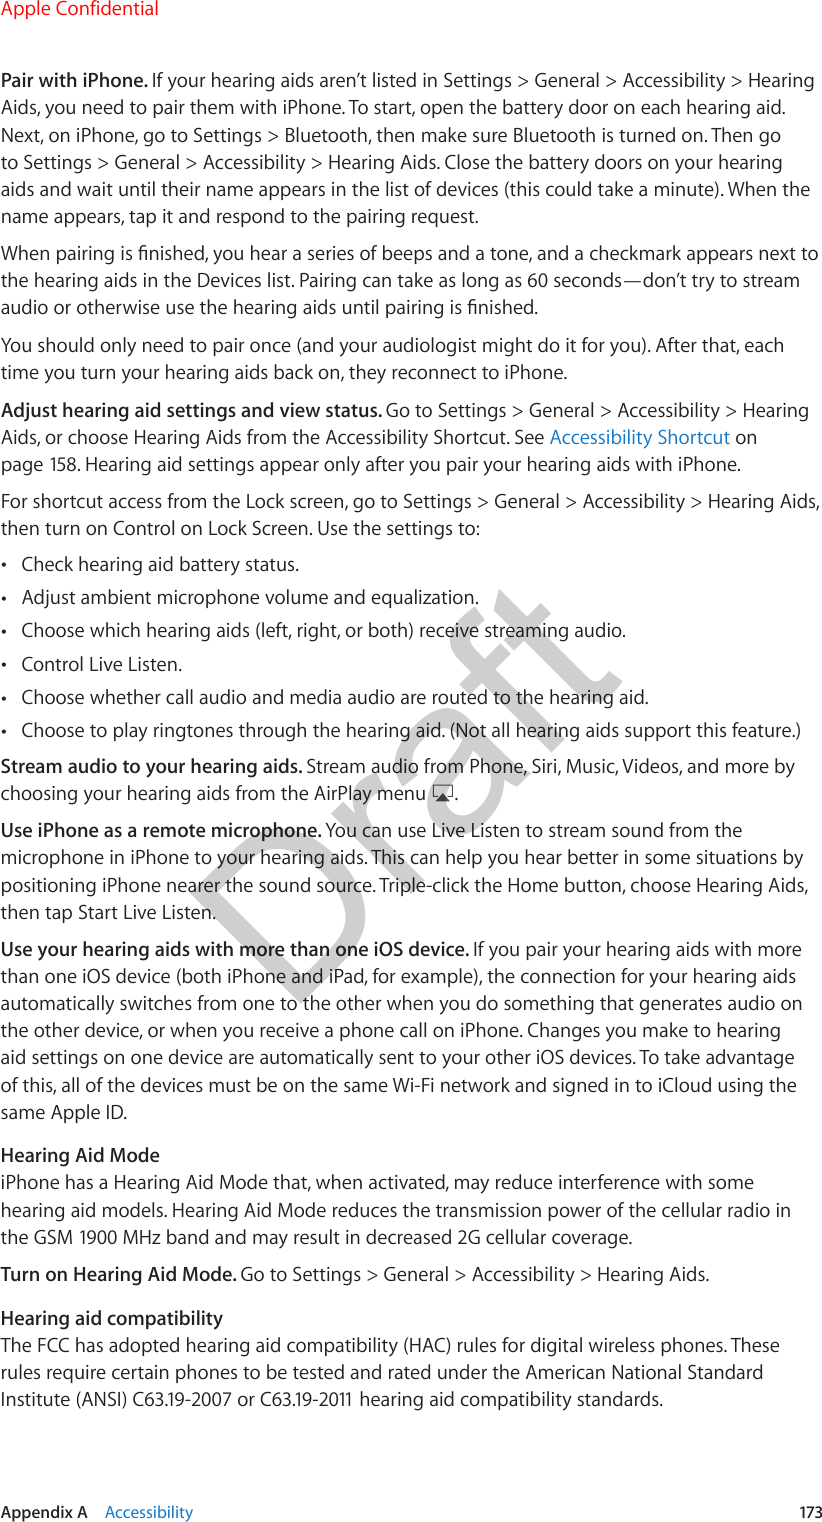 Appendix A    Accessibility  173Pair with iPhone. If your hearing aids aren’t listed in Settings &gt; General &gt; Accessibility &gt; Hearing Aids, you need to pair them with iPhone. To start, open the battery door on each hearing aid. Next, on iPhone, go to Settings &gt; Bluetooth, then make sure Bluetooth is turned on. Then go to Settings &gt; General &gt; Accessibility &gt; Hearing Aids. Close the battery doors on your hearing aids and wait until their name appears in the list of devices (this could take a minute). When the name appears, tap it and respond to the pairing request.When pairing is nished, you hear a series of beeps and a tone, and a checkmark appears next to the hearing aids in the Devices list. Pairing can take as long as 60 seconds—don’t try to stream audio or otherwise use the hearing aids until pairing is nished.You should only need to pair once (and your audiologist might do it for you). After that, each time you turn your hearing aids back on, they reconnect to iPhone.Adjust hearing aid settings and view status. Go to Settings &gt; General &gt; Accessibility &gt; Hearing Aids, or choose Hearing Aids from the Accessibility Shortcut. See Accessibility Shortcut on page 158. Hearing aid settings appear only after you pair your hearing aids with iPhone.For shortcut access from the Lock screen, go to Settings &gt; General &gt; Accessibility &gt; Hearing Aids, then turn on Control on Lock Screen. Use the settings to: •Check hearing aid battery status. •Adjust ambient microphone volume and equalization. •Choose which hearing aids (left, right, or both) receive streaming audio. •Control Live Listen. •Choose whether call audio and media audio are routed to the hearing aid. •Choose to play ringtones through the hearing aid. (Not all hearing aids support this feature.)Stream audio to your hearing aids. Stream audio from Phone, Siri, Music, Videos, and more by choosing your hearing aids from the AirPlay menu  .Use iPhone as a remote microphone. You can use Live Listen to stream sound from the microphone in iPhone to your hearing aids. This can help you hear better in some situations by positioning iPhone nearer the sound source. Triple-click the Home button, choose Hearing Aids, then tap Start Live Listen.Use your hearing aids with more than one iOS device. If you pair your hearing aids with more than one iOS device (both iPhone and iPad, for example), the connection for your hearing aids automatically switches from one to the other when you do something that generates audio on the other device, or when you receive a phone call on iPhone. Changes you make to hearing aid settings on one device are automatically sent to your other iOS devices. To take advantage of this, all of the devices must be on the same Wi-Fi network and signed in to iCloud using the same Apple ID.Hearing Aid ModeiPhone has a Hearing Aid Mode that, when activated, may reduce interference with some hearing aid models. Hearing Aid Mode reduces the transmission power of the cellular radio in the GSM 1900 MHz band and may result in decreased 2G cellular coverage.Turn on Hearing Aid Mode. Go to Settings &gt; General &gt; Accessibility &gt; Hearing Aids.Hearing aid compatibilityThe FCC has adopted hearing aid compatibility (HAC) rules for digital wireless phones. These rules require certain phones to be tested and rated under the American National Standard Institute (ANSI) C63.19-2007 or C63.19-2011 hearing aid compatibility standards. Apple ConfidentialDraft